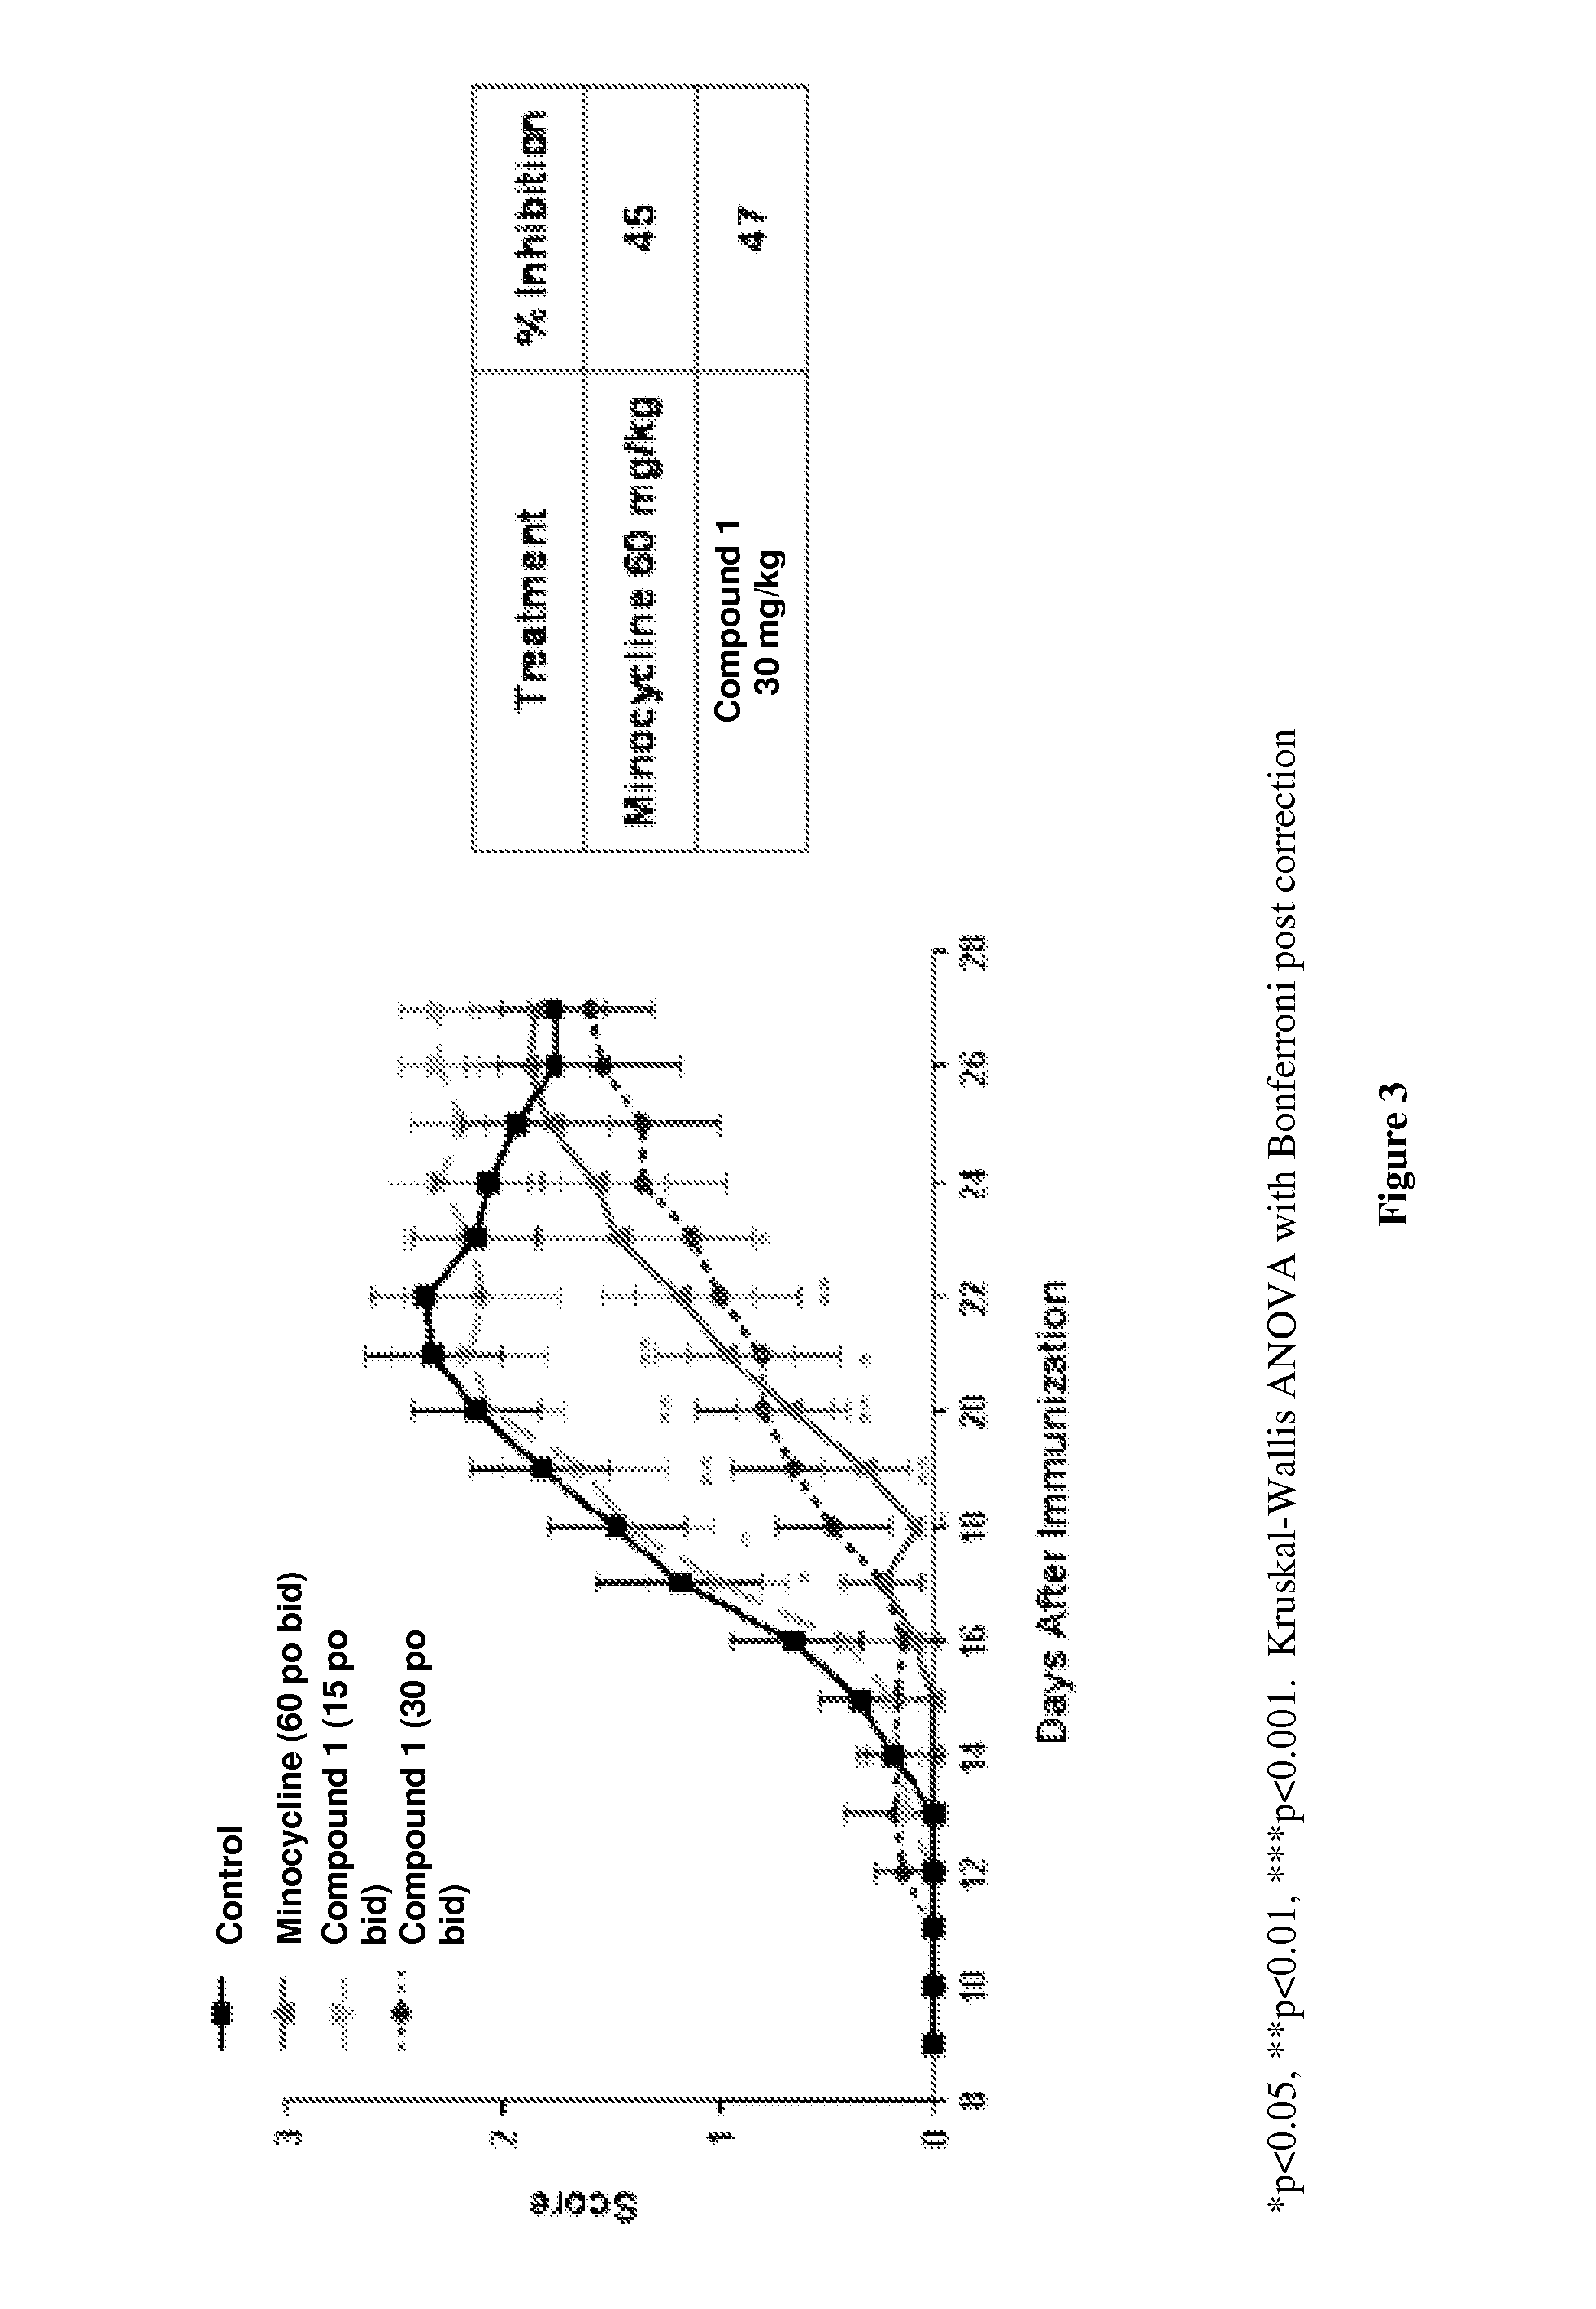 Tetracycline compounds for treating neurodegenerative disorders